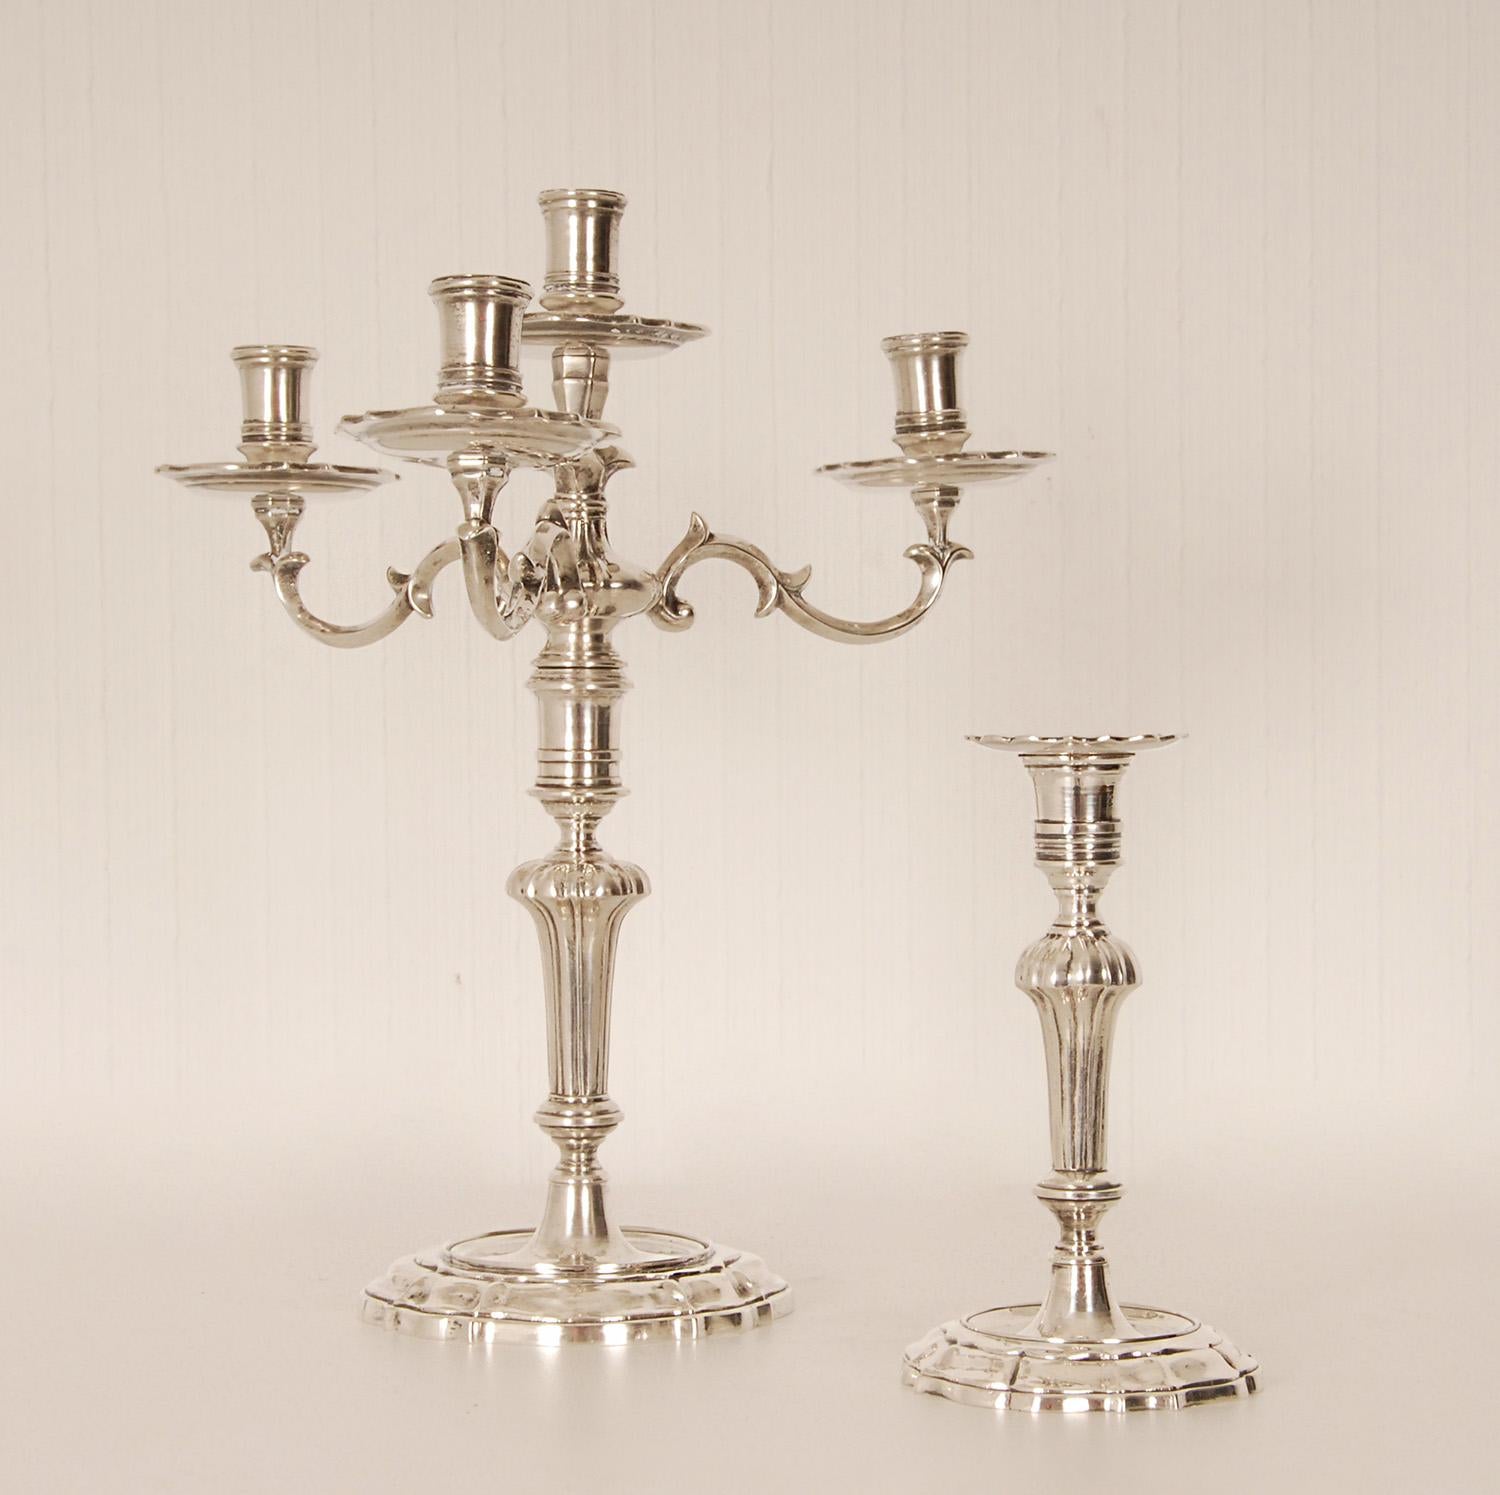 2 Italian contemporaries solid silver candlesticks altar Church candlesticks
Style: Rococo, Italian, Antique, Louis XV, 
One of it can be converted to a candelabra
Each on a shaped circular base, with kopped flaring fluted stem with spool-form